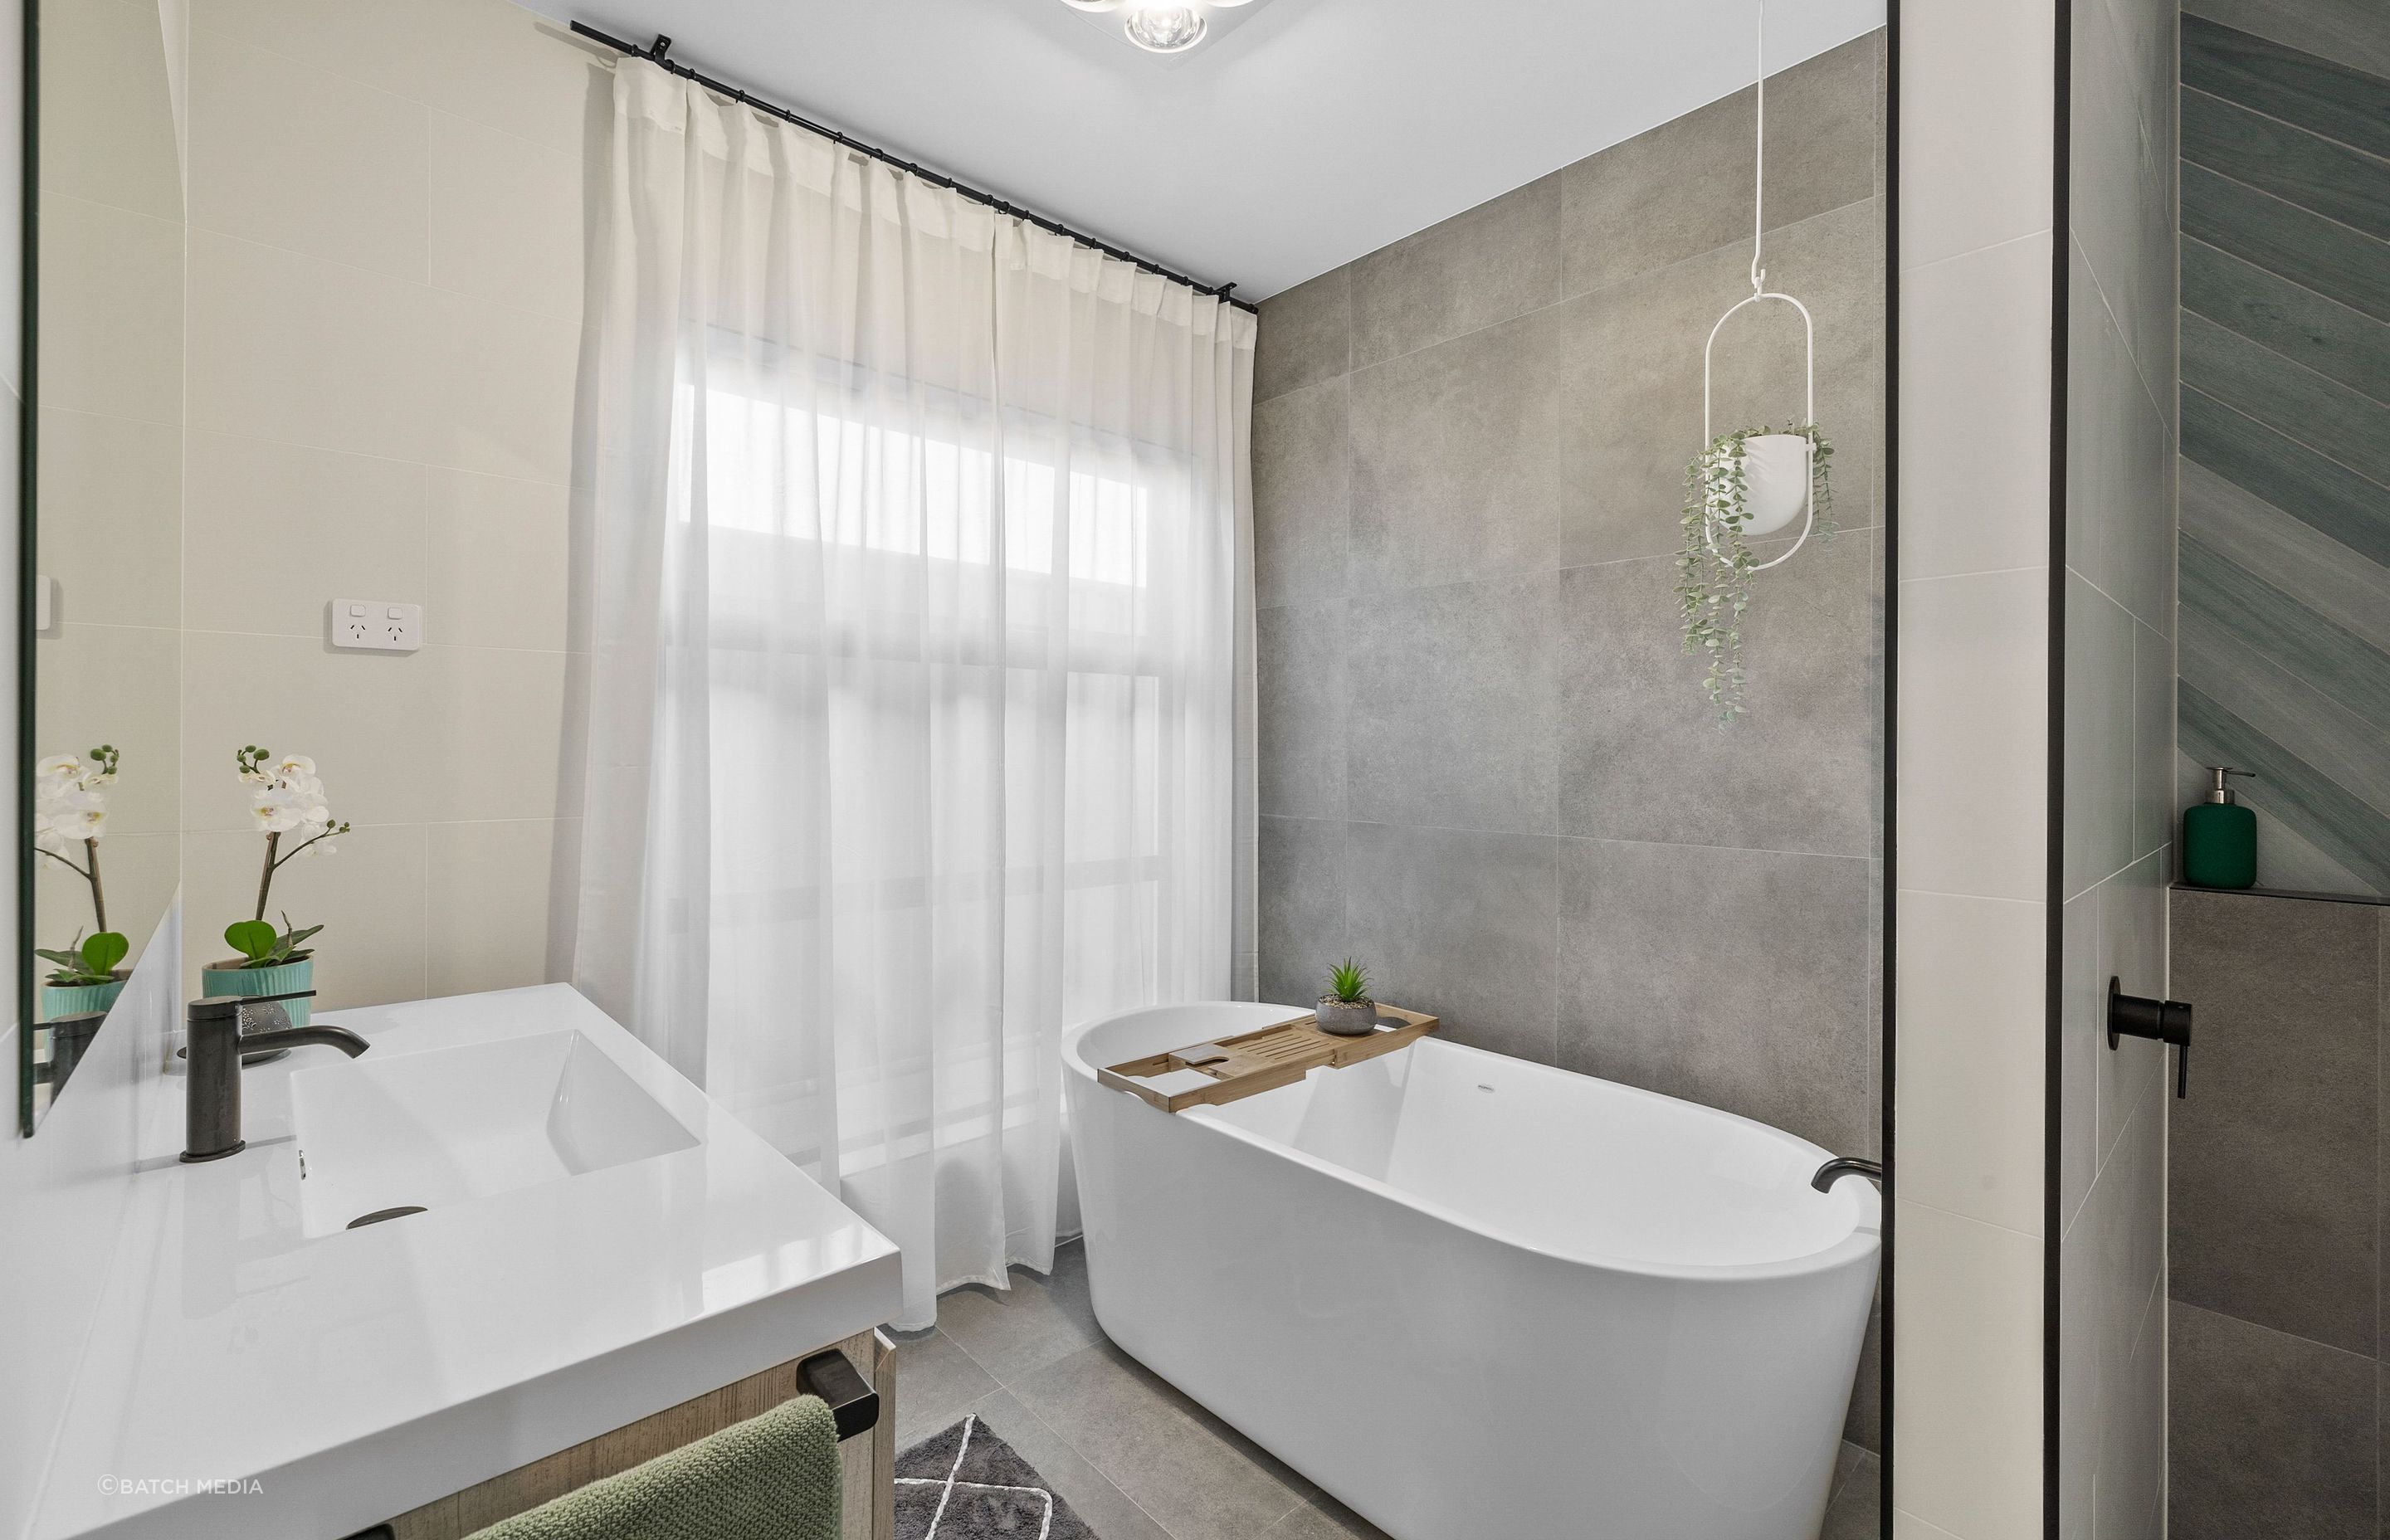 A bathroom space can be designed as a personal sanctuary; this bathroom by Black Line Concepts is elevated through the use of a soft draping curtain and hanging plant.